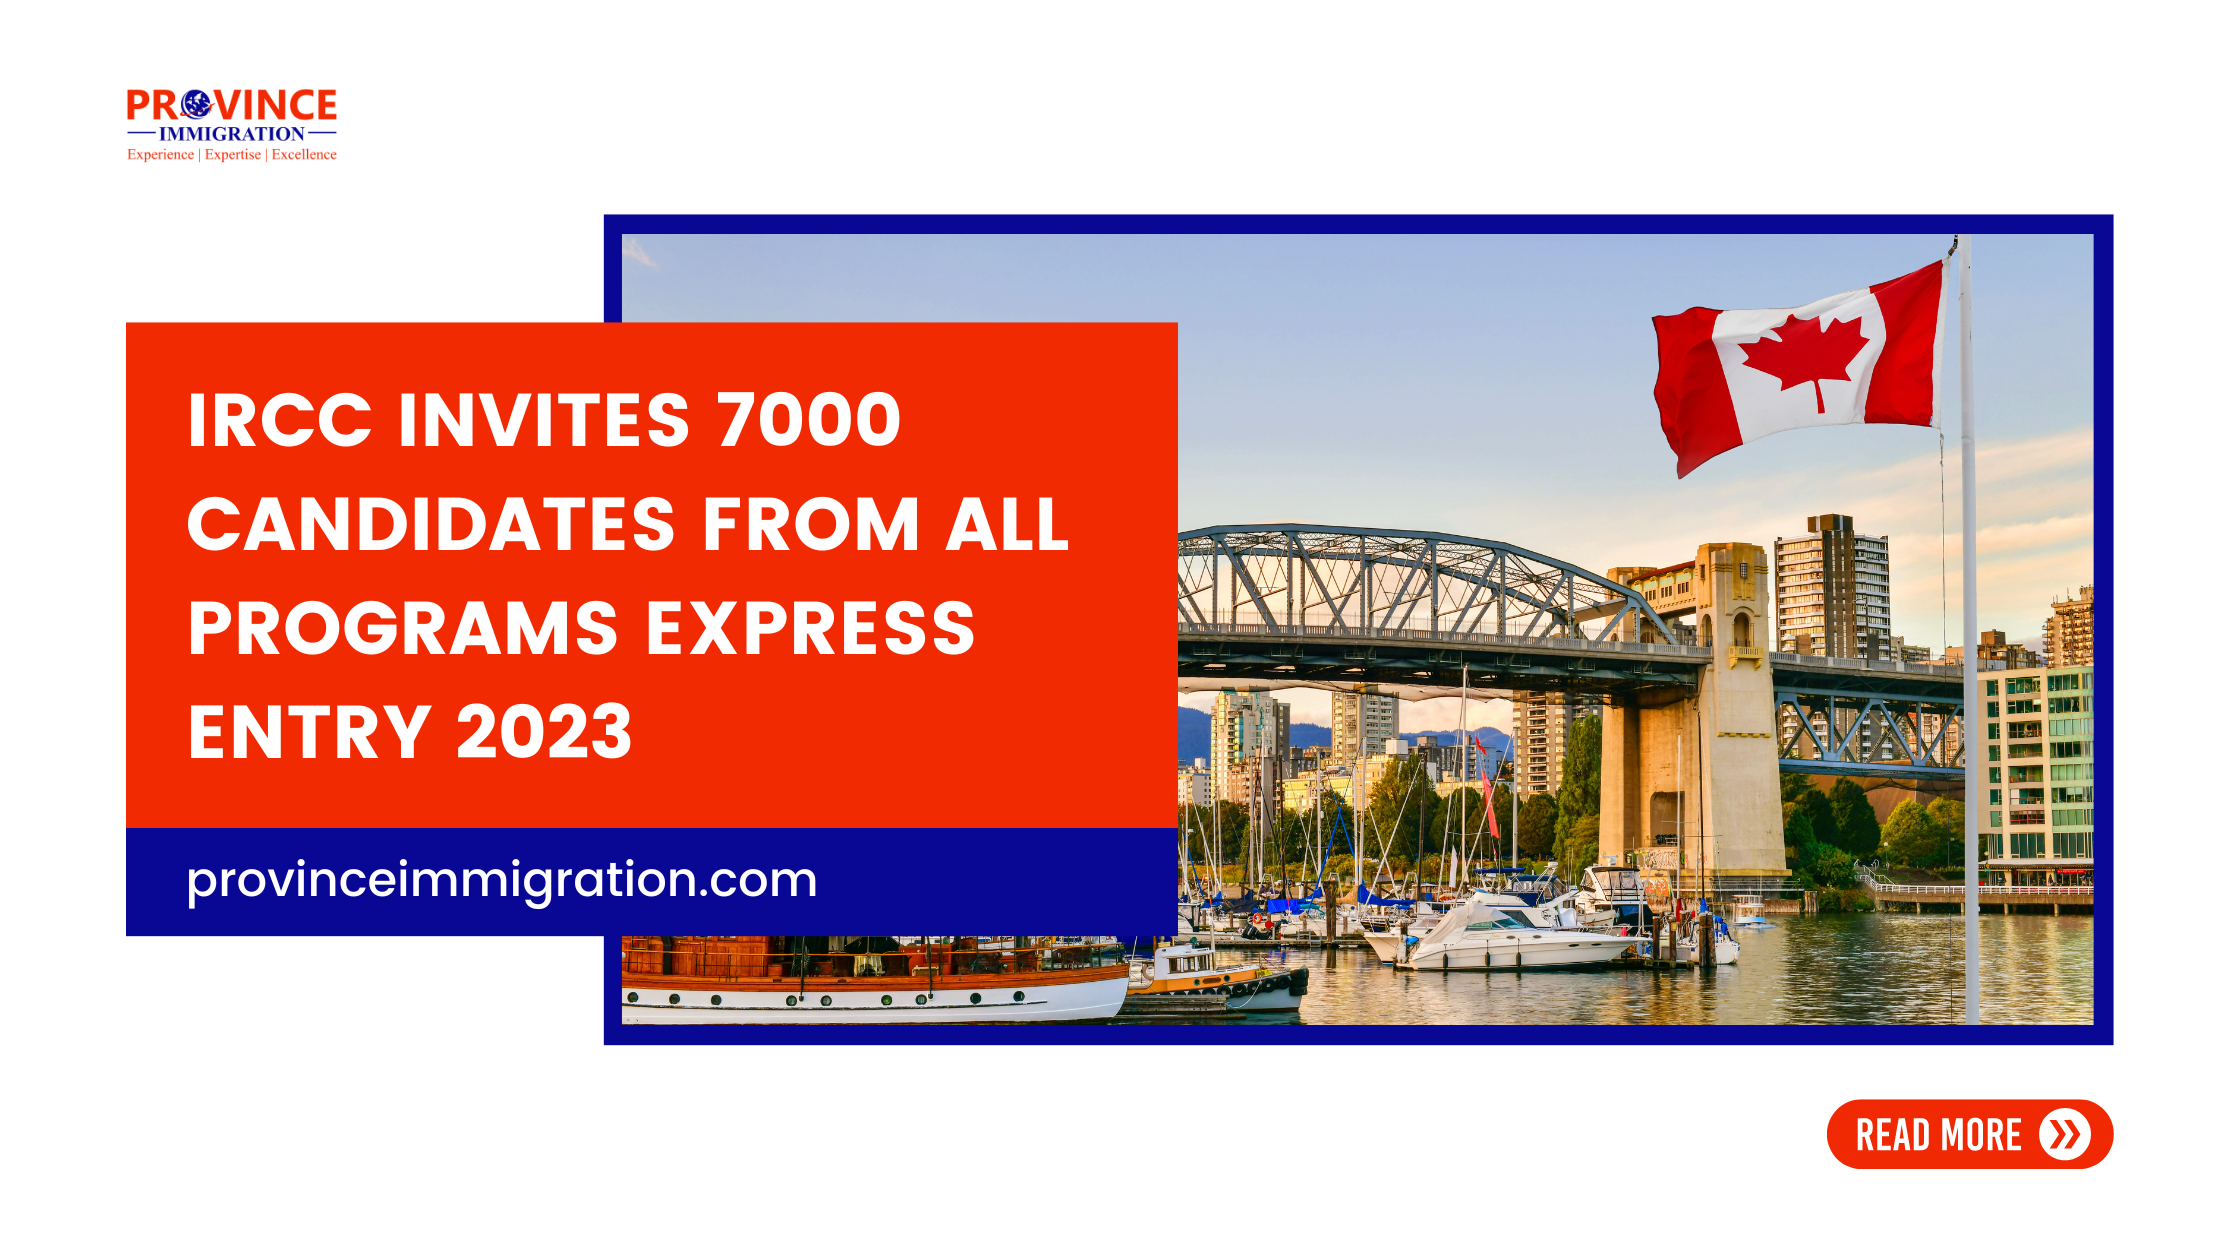 IRCC INVITES 7000 CANDIDATES FROM ALL PROGRAM EXPRESS ENTRY 2023